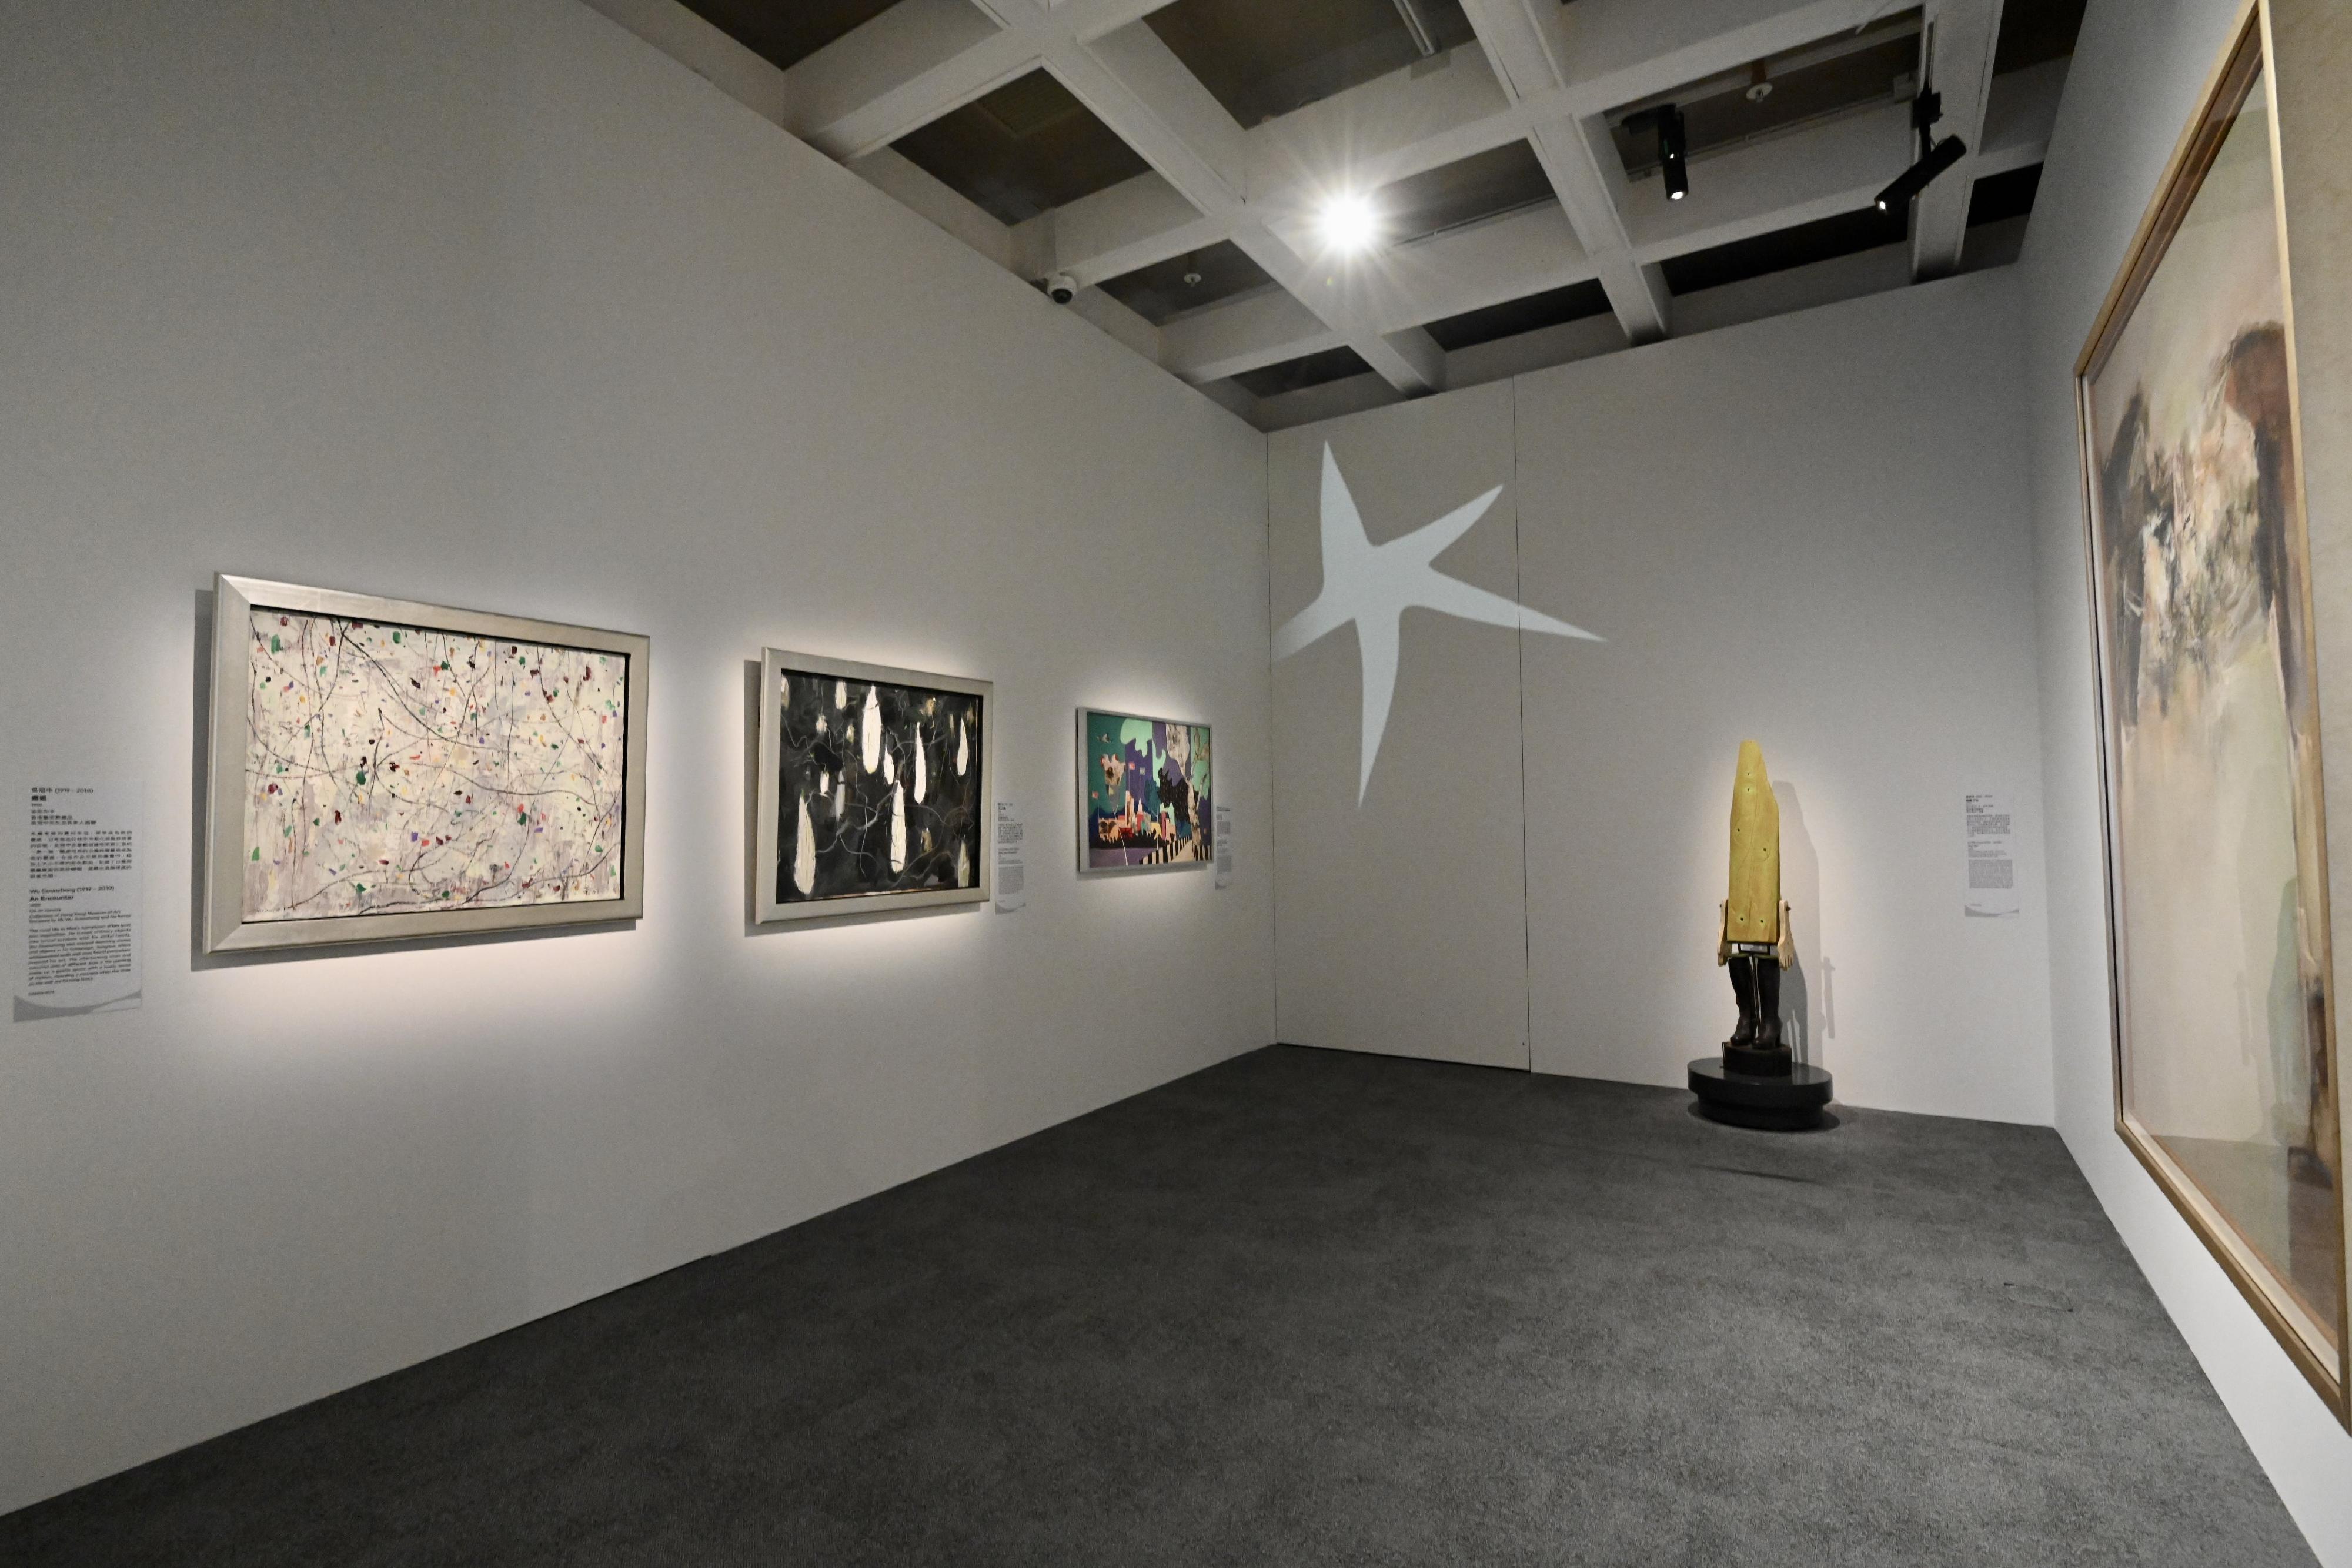 "The Hong Kong Jockey Club Series: Joan Miró — The Poetry of Everyday Life" exhibition will be held at the Hong Kong Museum of Art (HKMoA) starting from tomorrow (March 3). Artworks by Zao Wou-ki, Wu Guanzhong, Luis Chan and Ha Bik-chuen from the HKMoA's collection are also on display in the same gallery to highlight the relationship between Miró and these four artist and similarities and differences between them in the comprehension of abstract art.